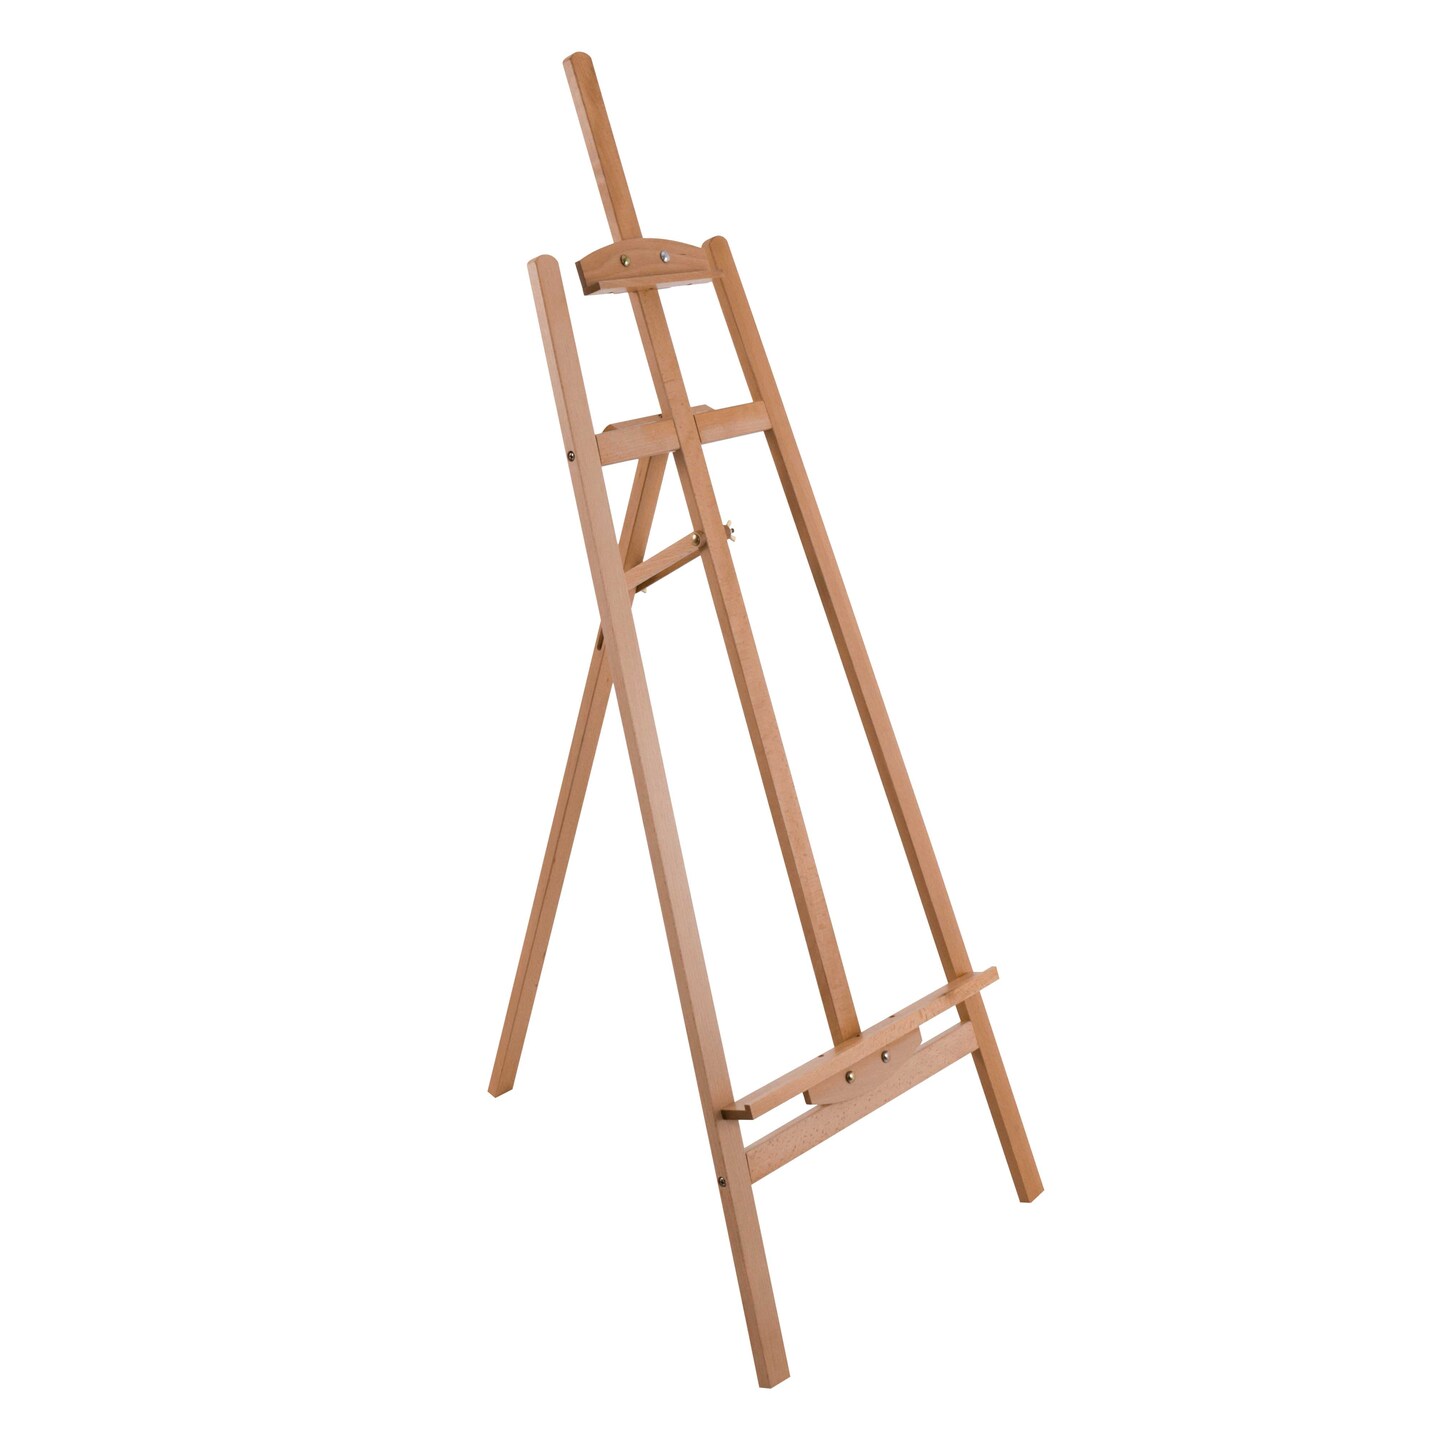  HERCHR Easel Stand for Painting, Easels for Painting Canvas  Easel Stand for Display Backdrop Stand for Parties Easley Stand for Painting  Portable Artist Easel Stand Folding Tripod Black : Office Products